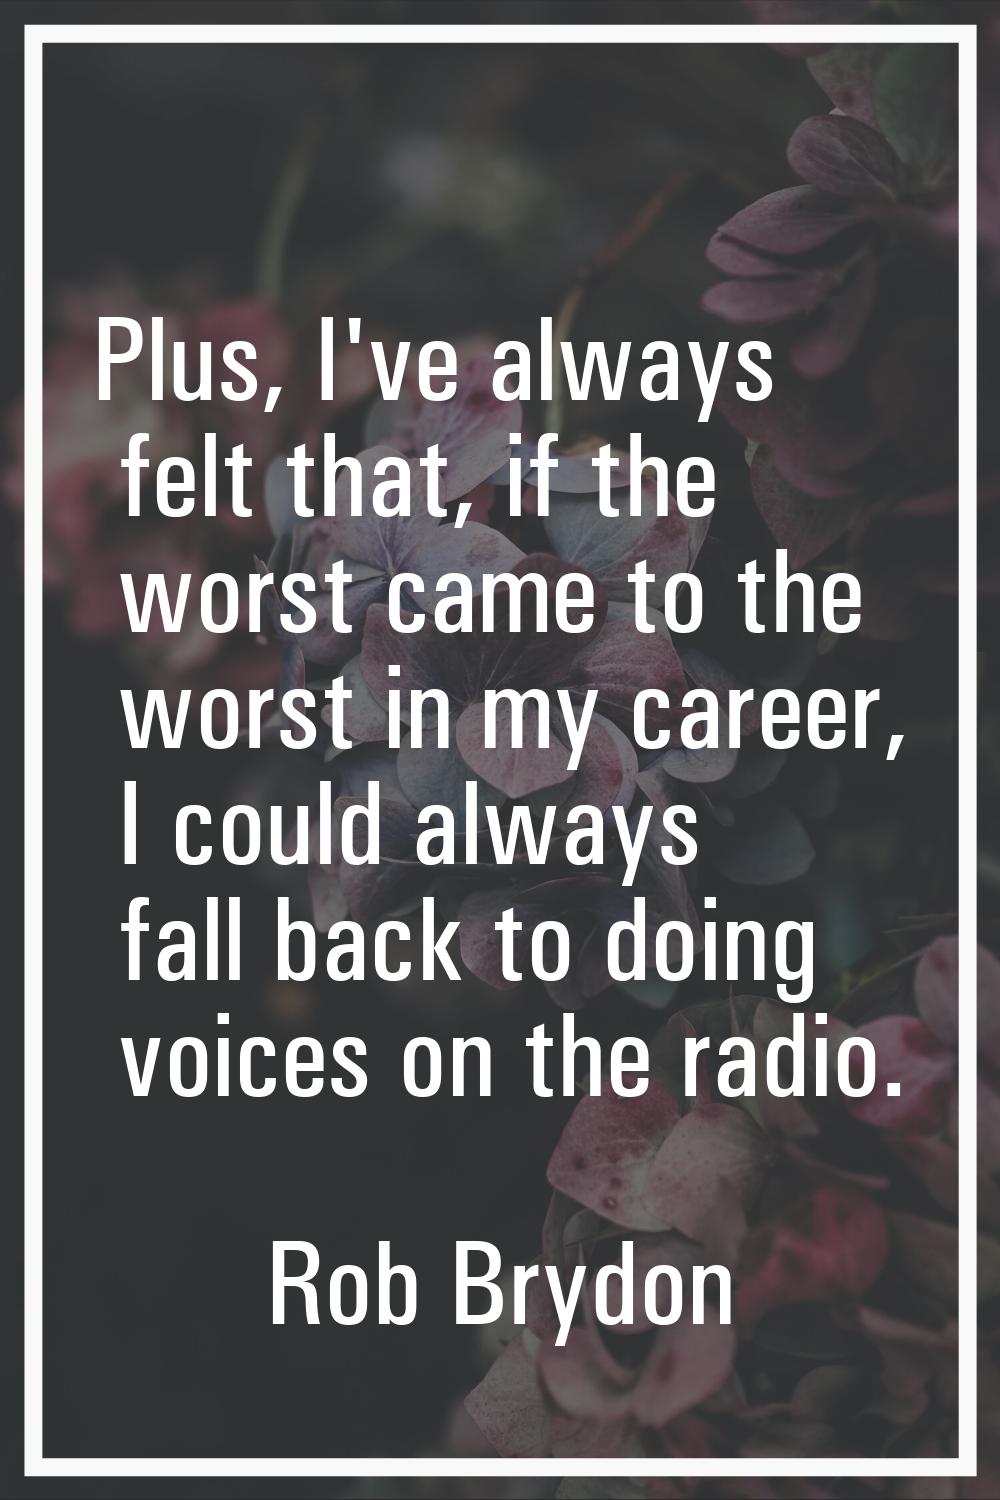 Plus, I've always felt that, if the worst came to the worst in my career, I could always fall back 